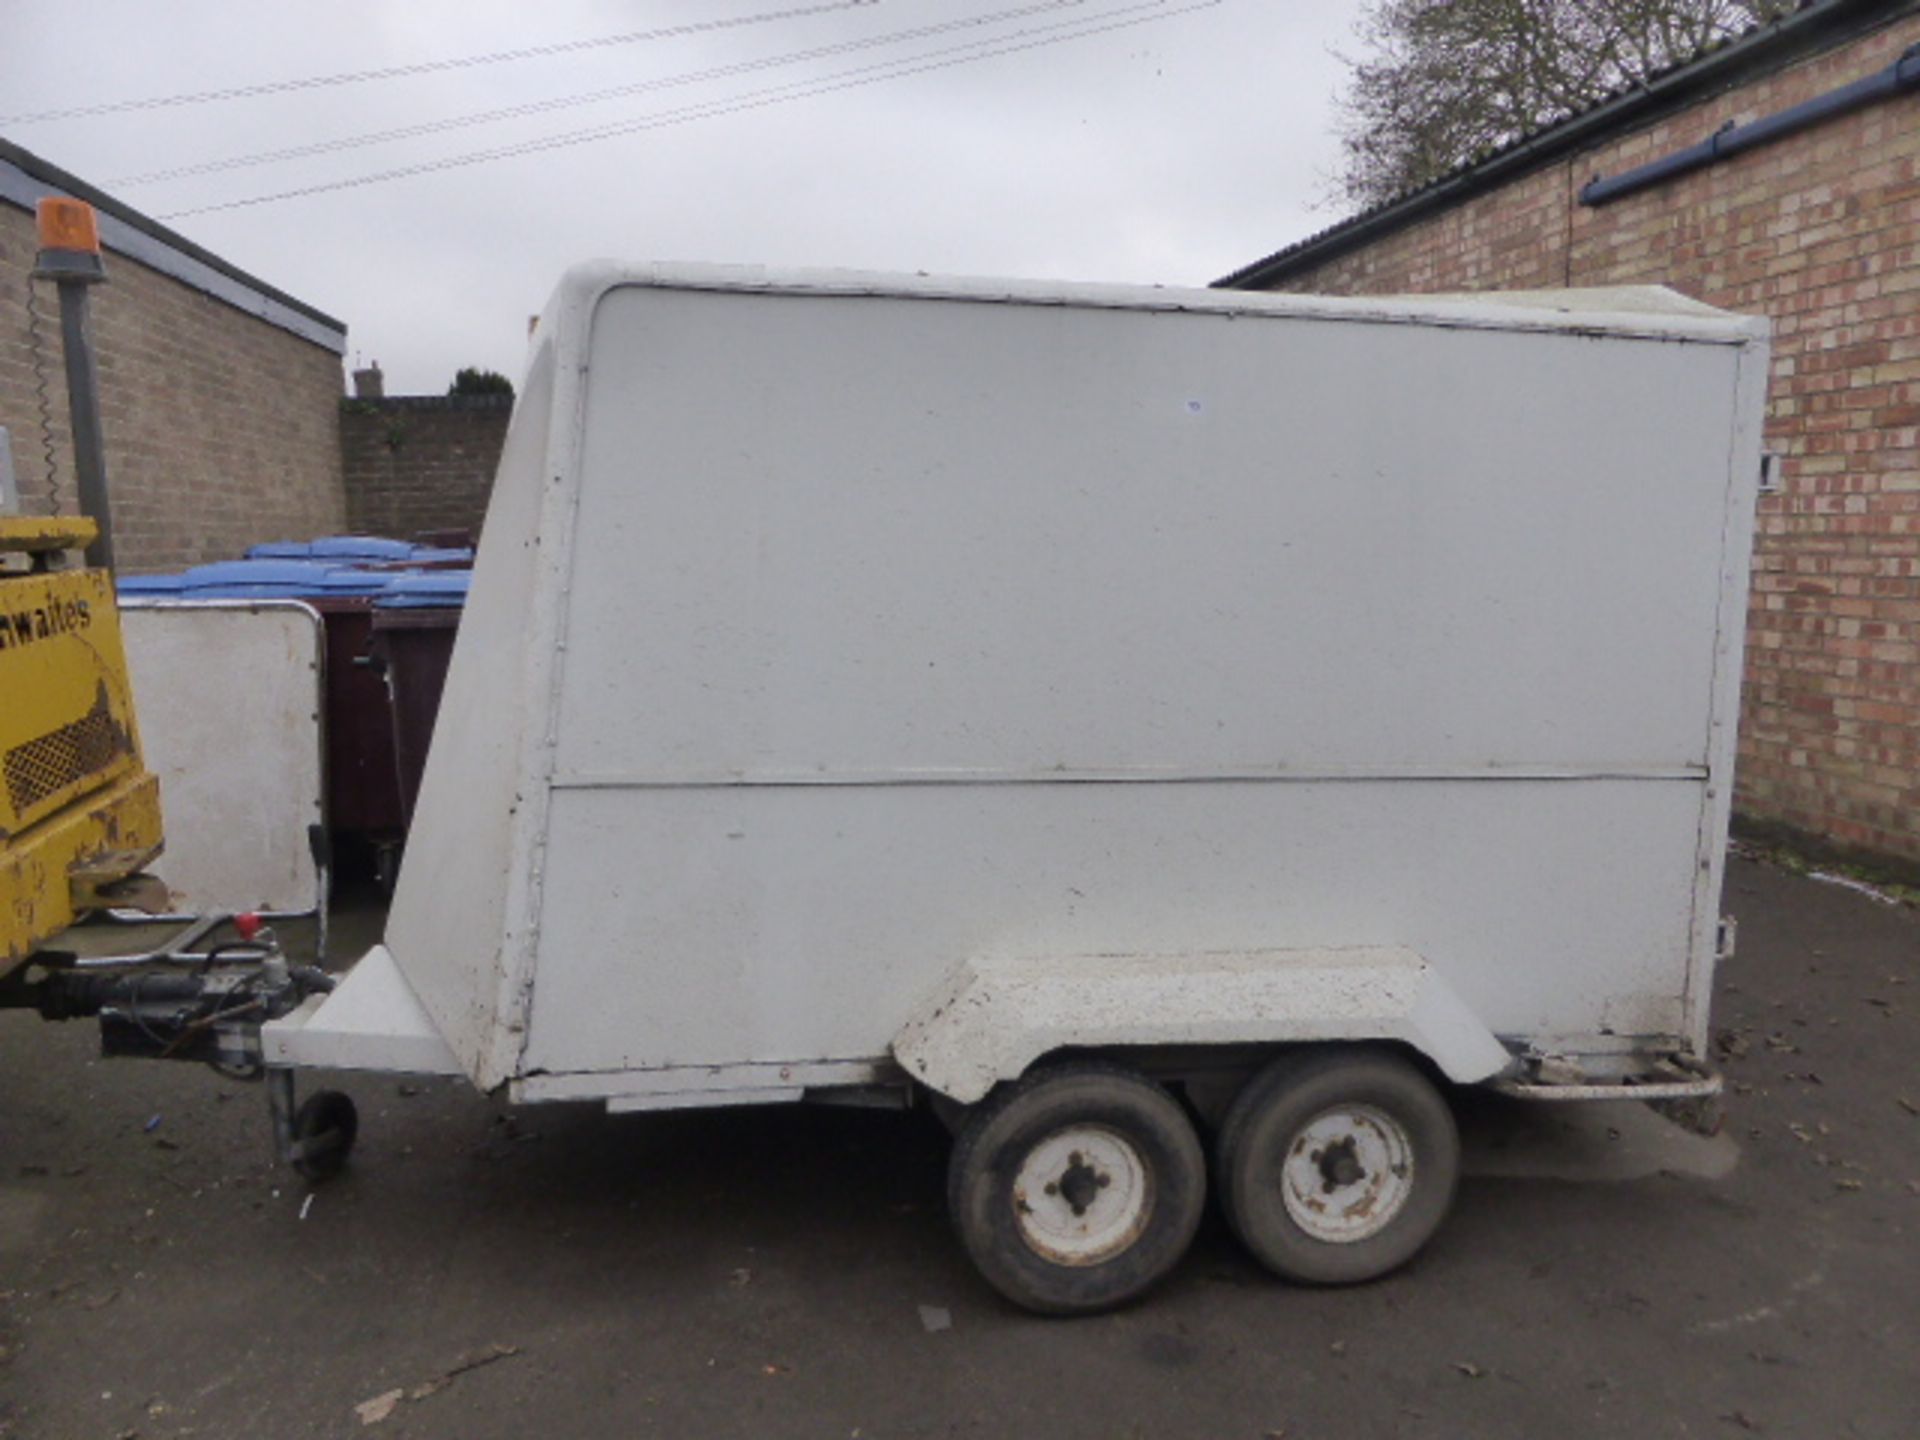 8' x 4' twin axle box trailer, ply lined with double door access to rear